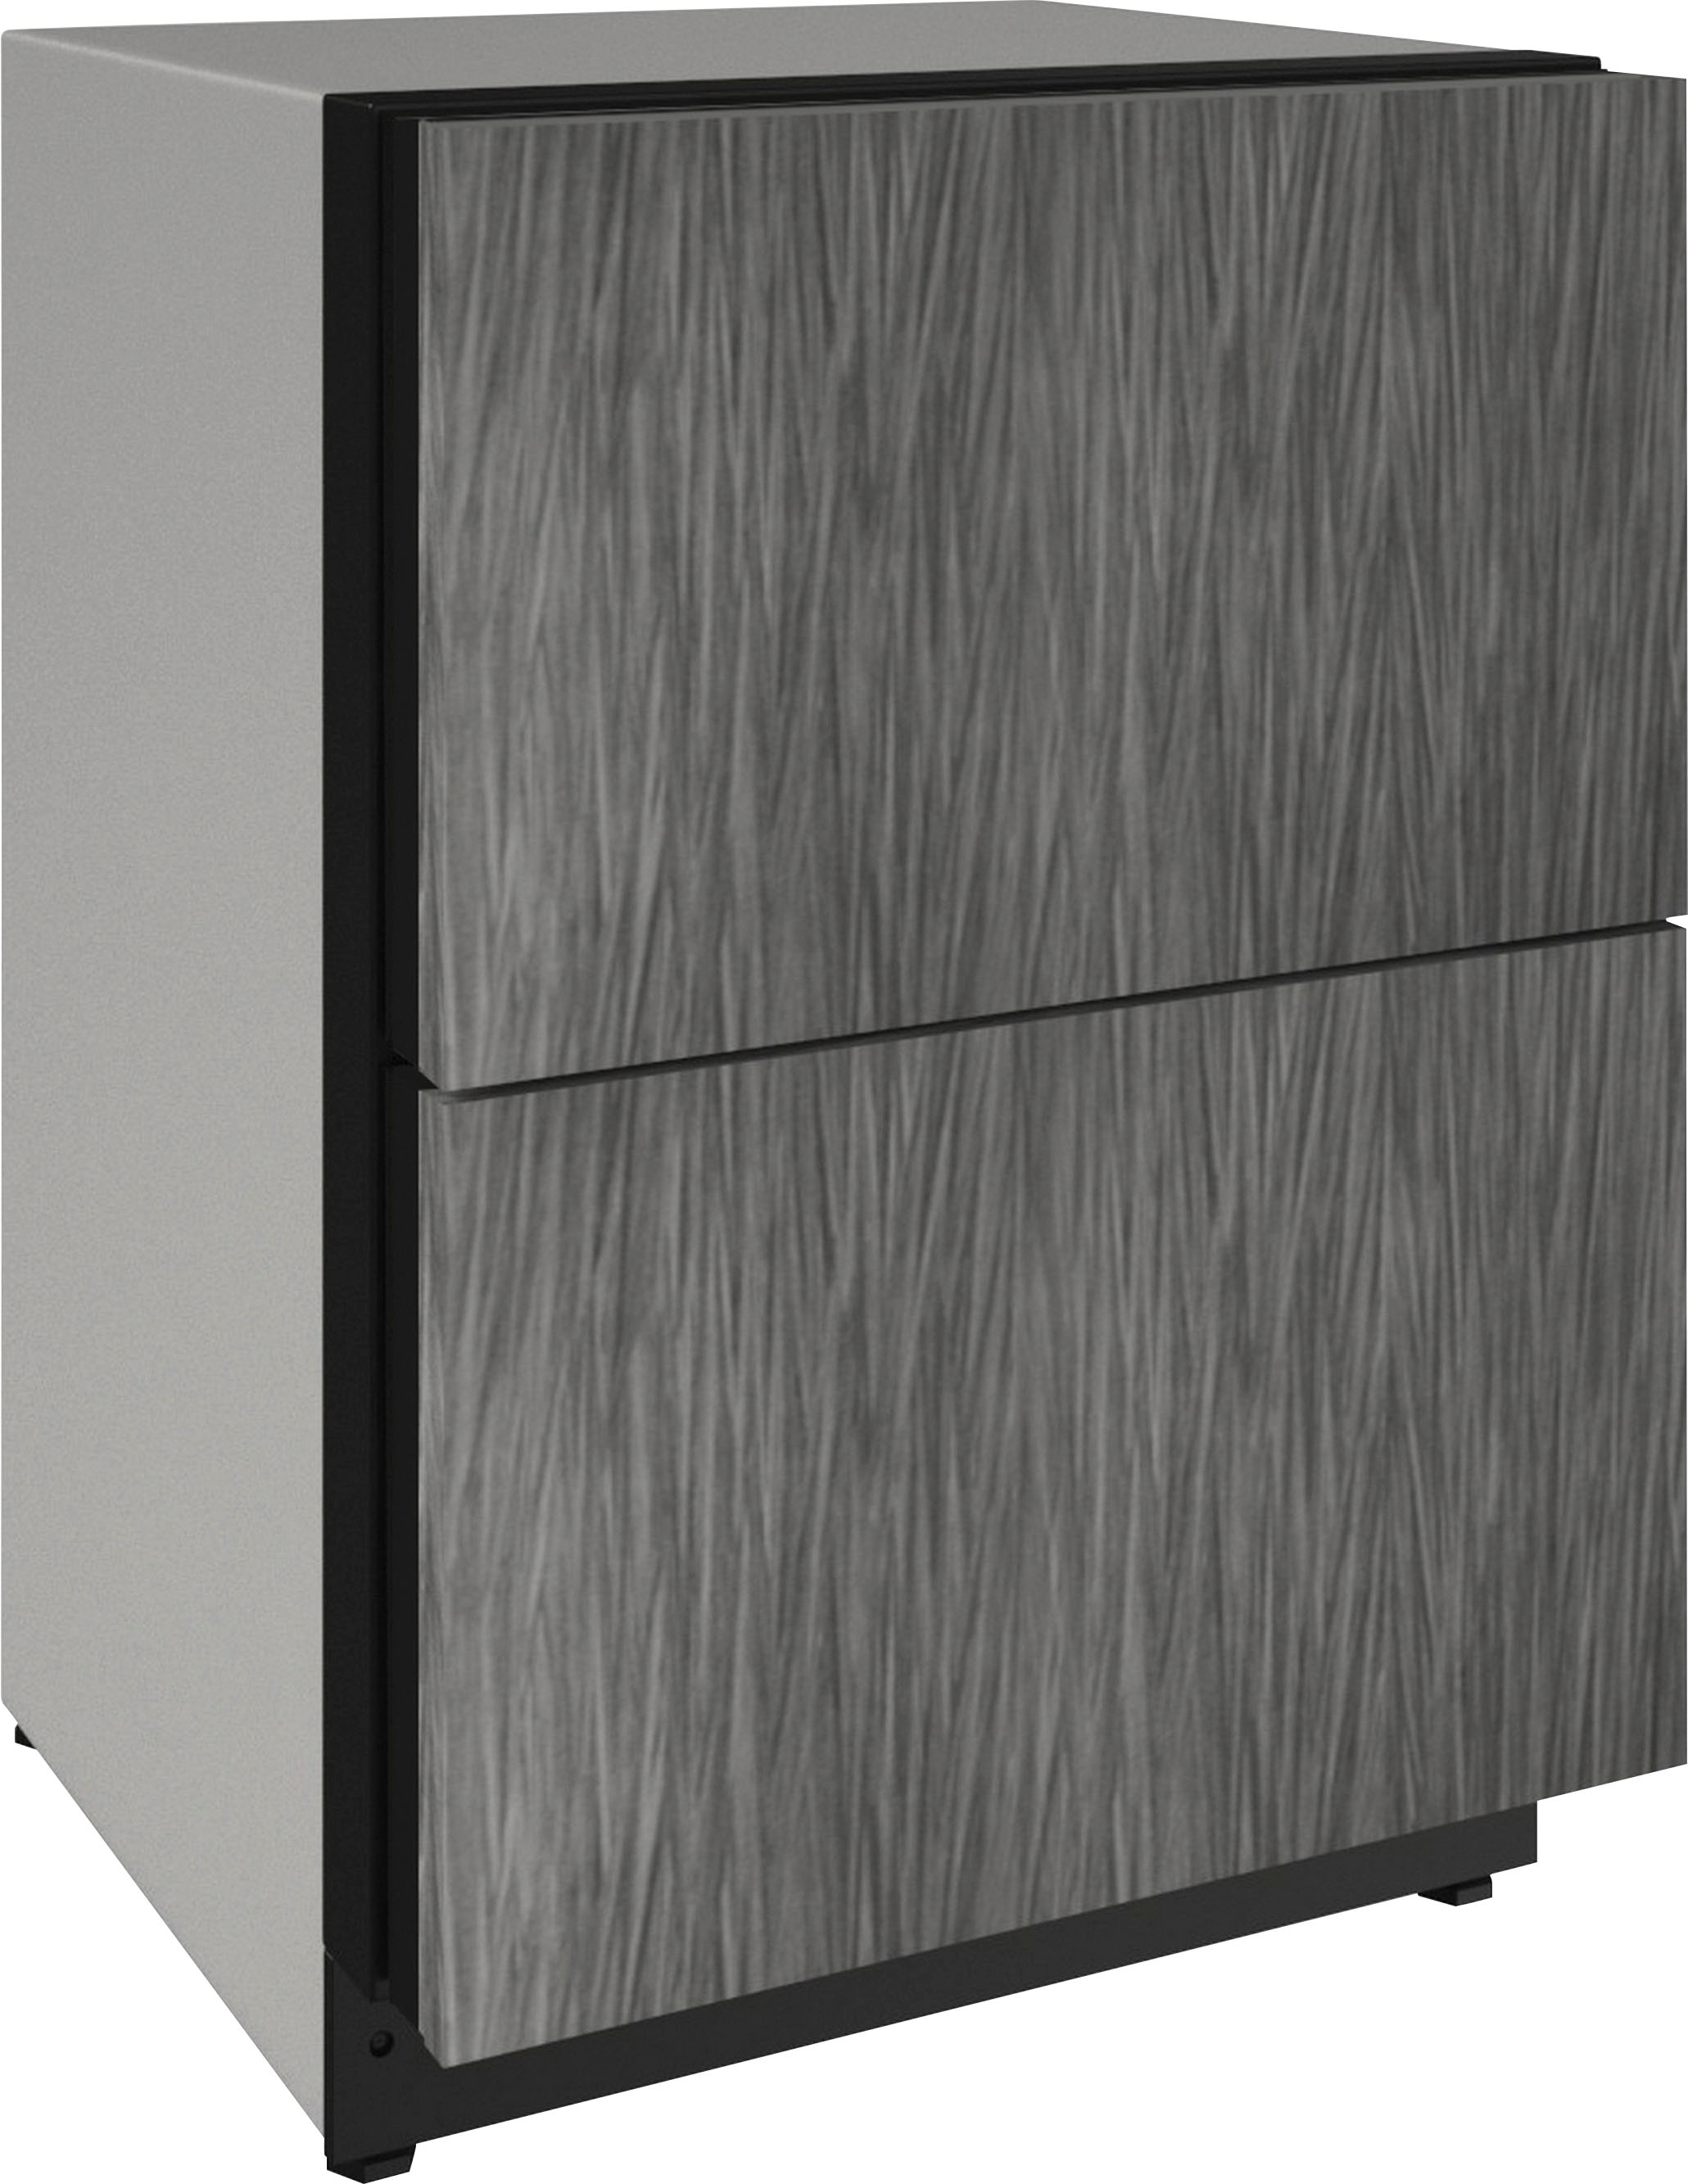 Angle View: U-Line - 5 Class 14-Bottle Wine Refrigerator - Stainless steel